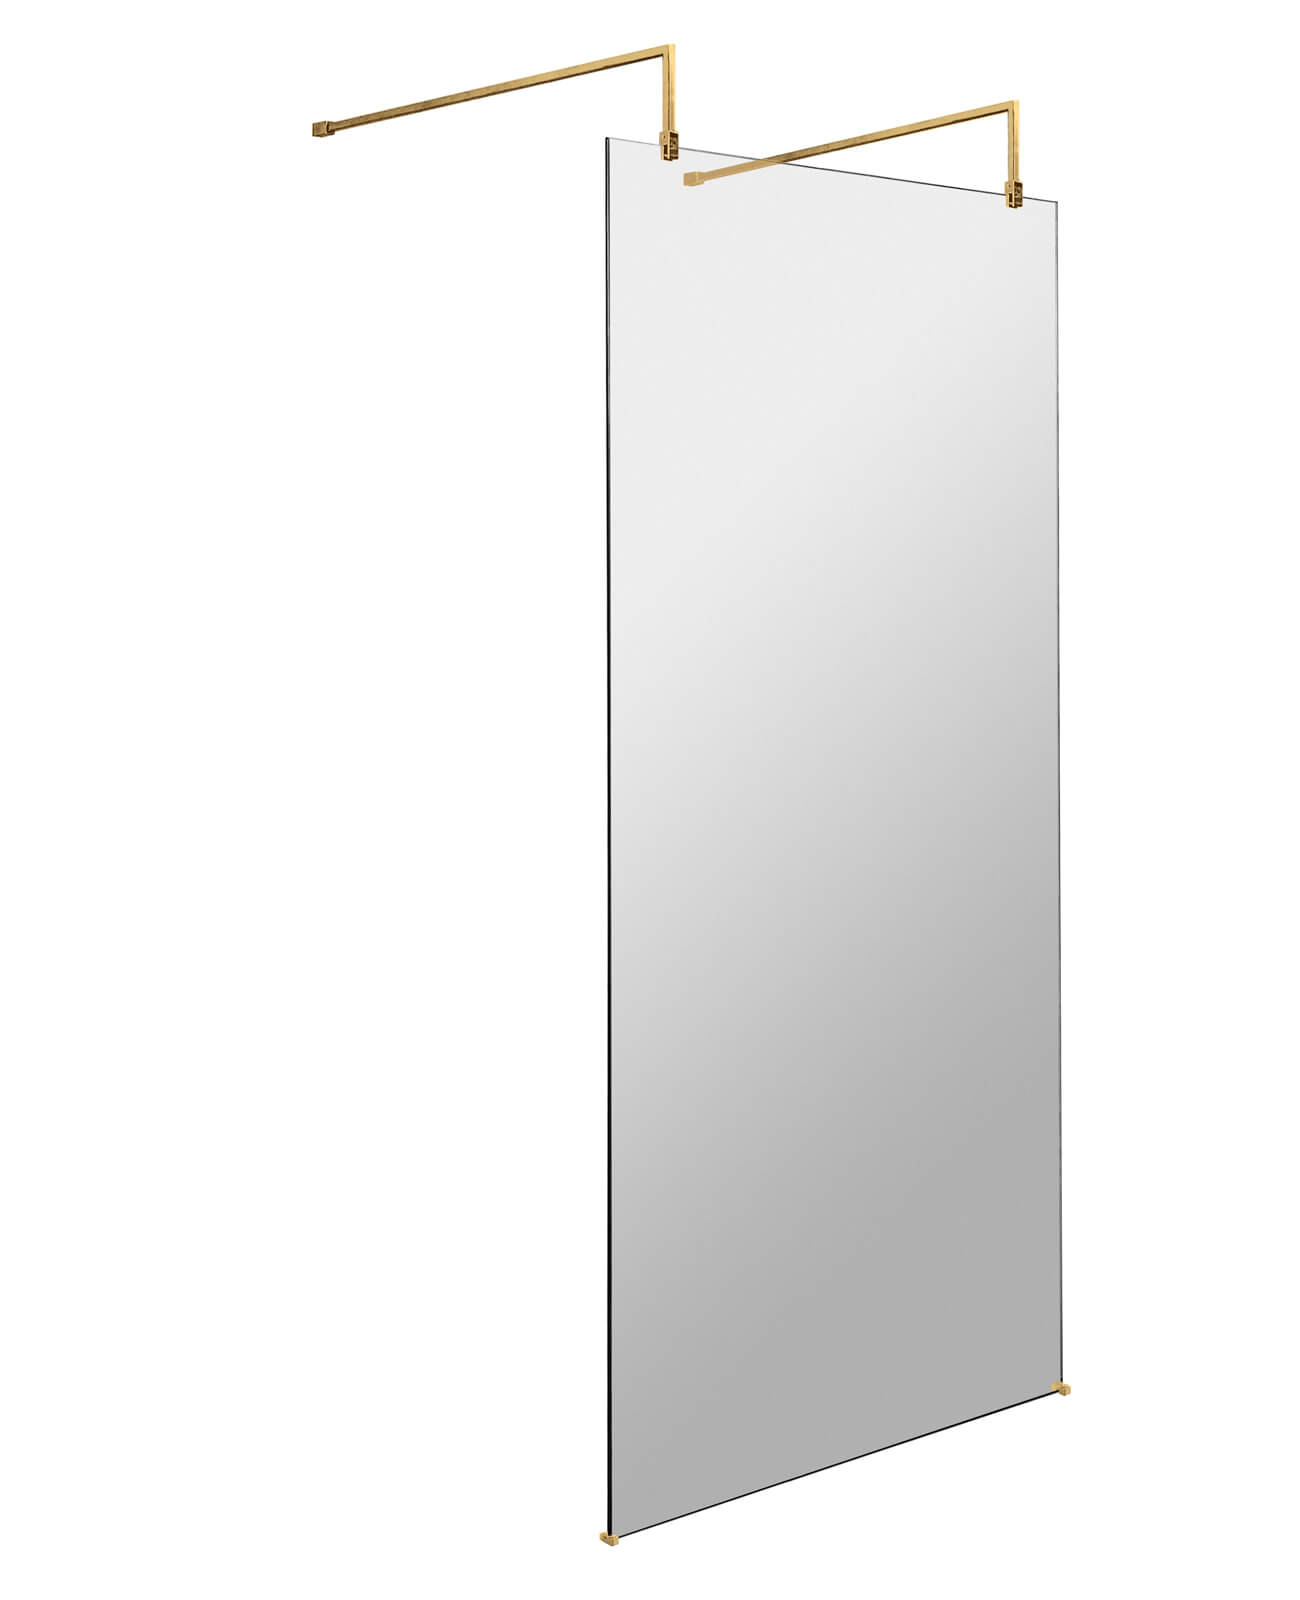 Hudson Reed Freestanding Wetroom Screen With Arms And Feet - BBPAF070